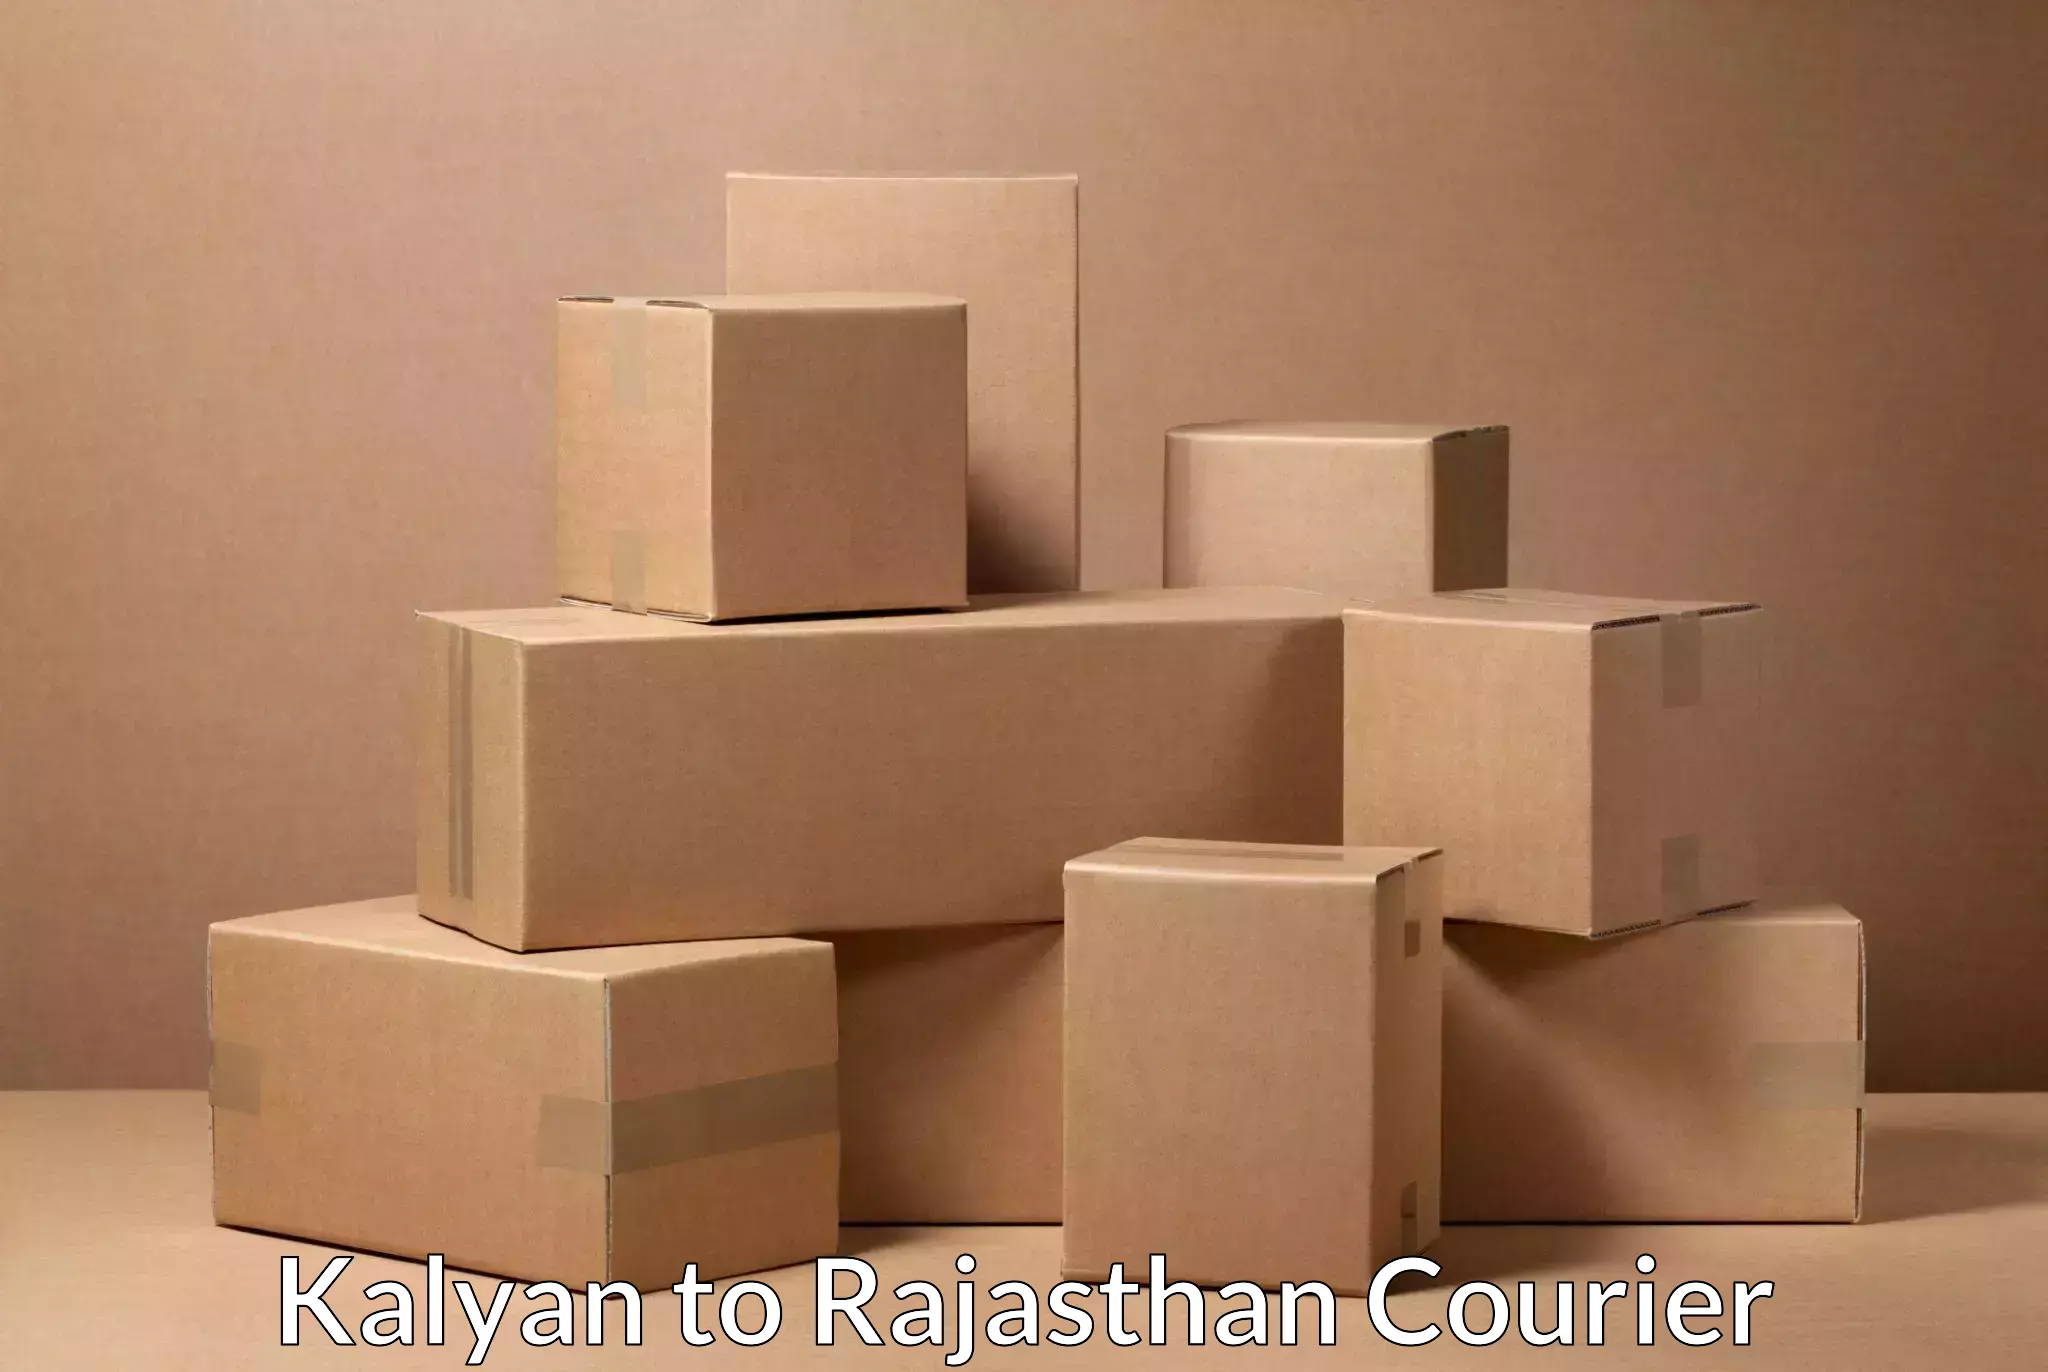 State-of-the-art courier technology Kalyan to Dudu